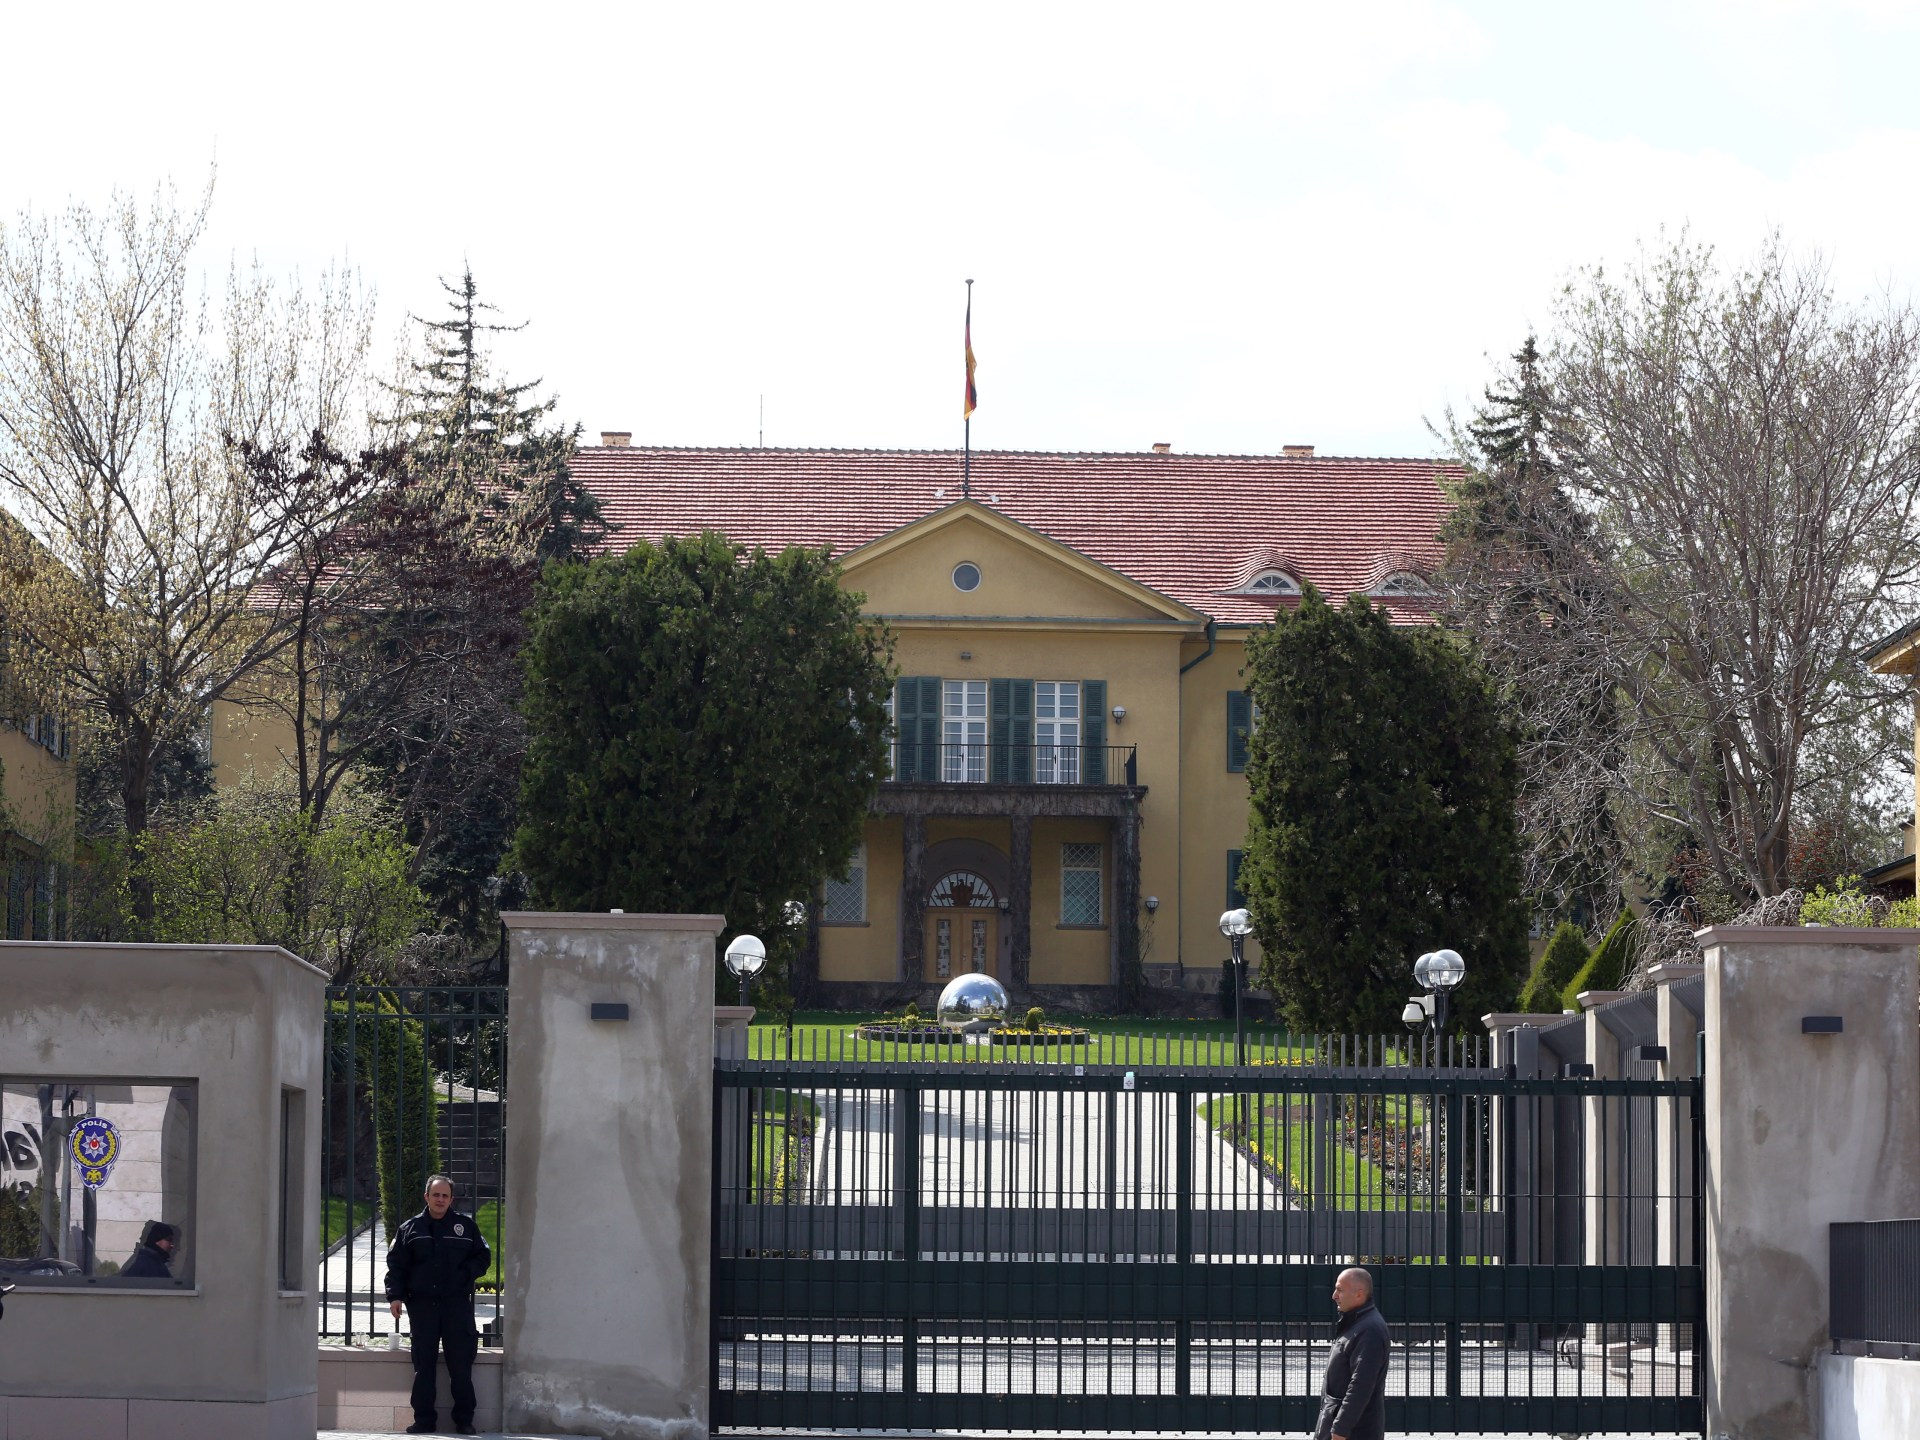 Turkey: No evidence from Western nations after consulate closures